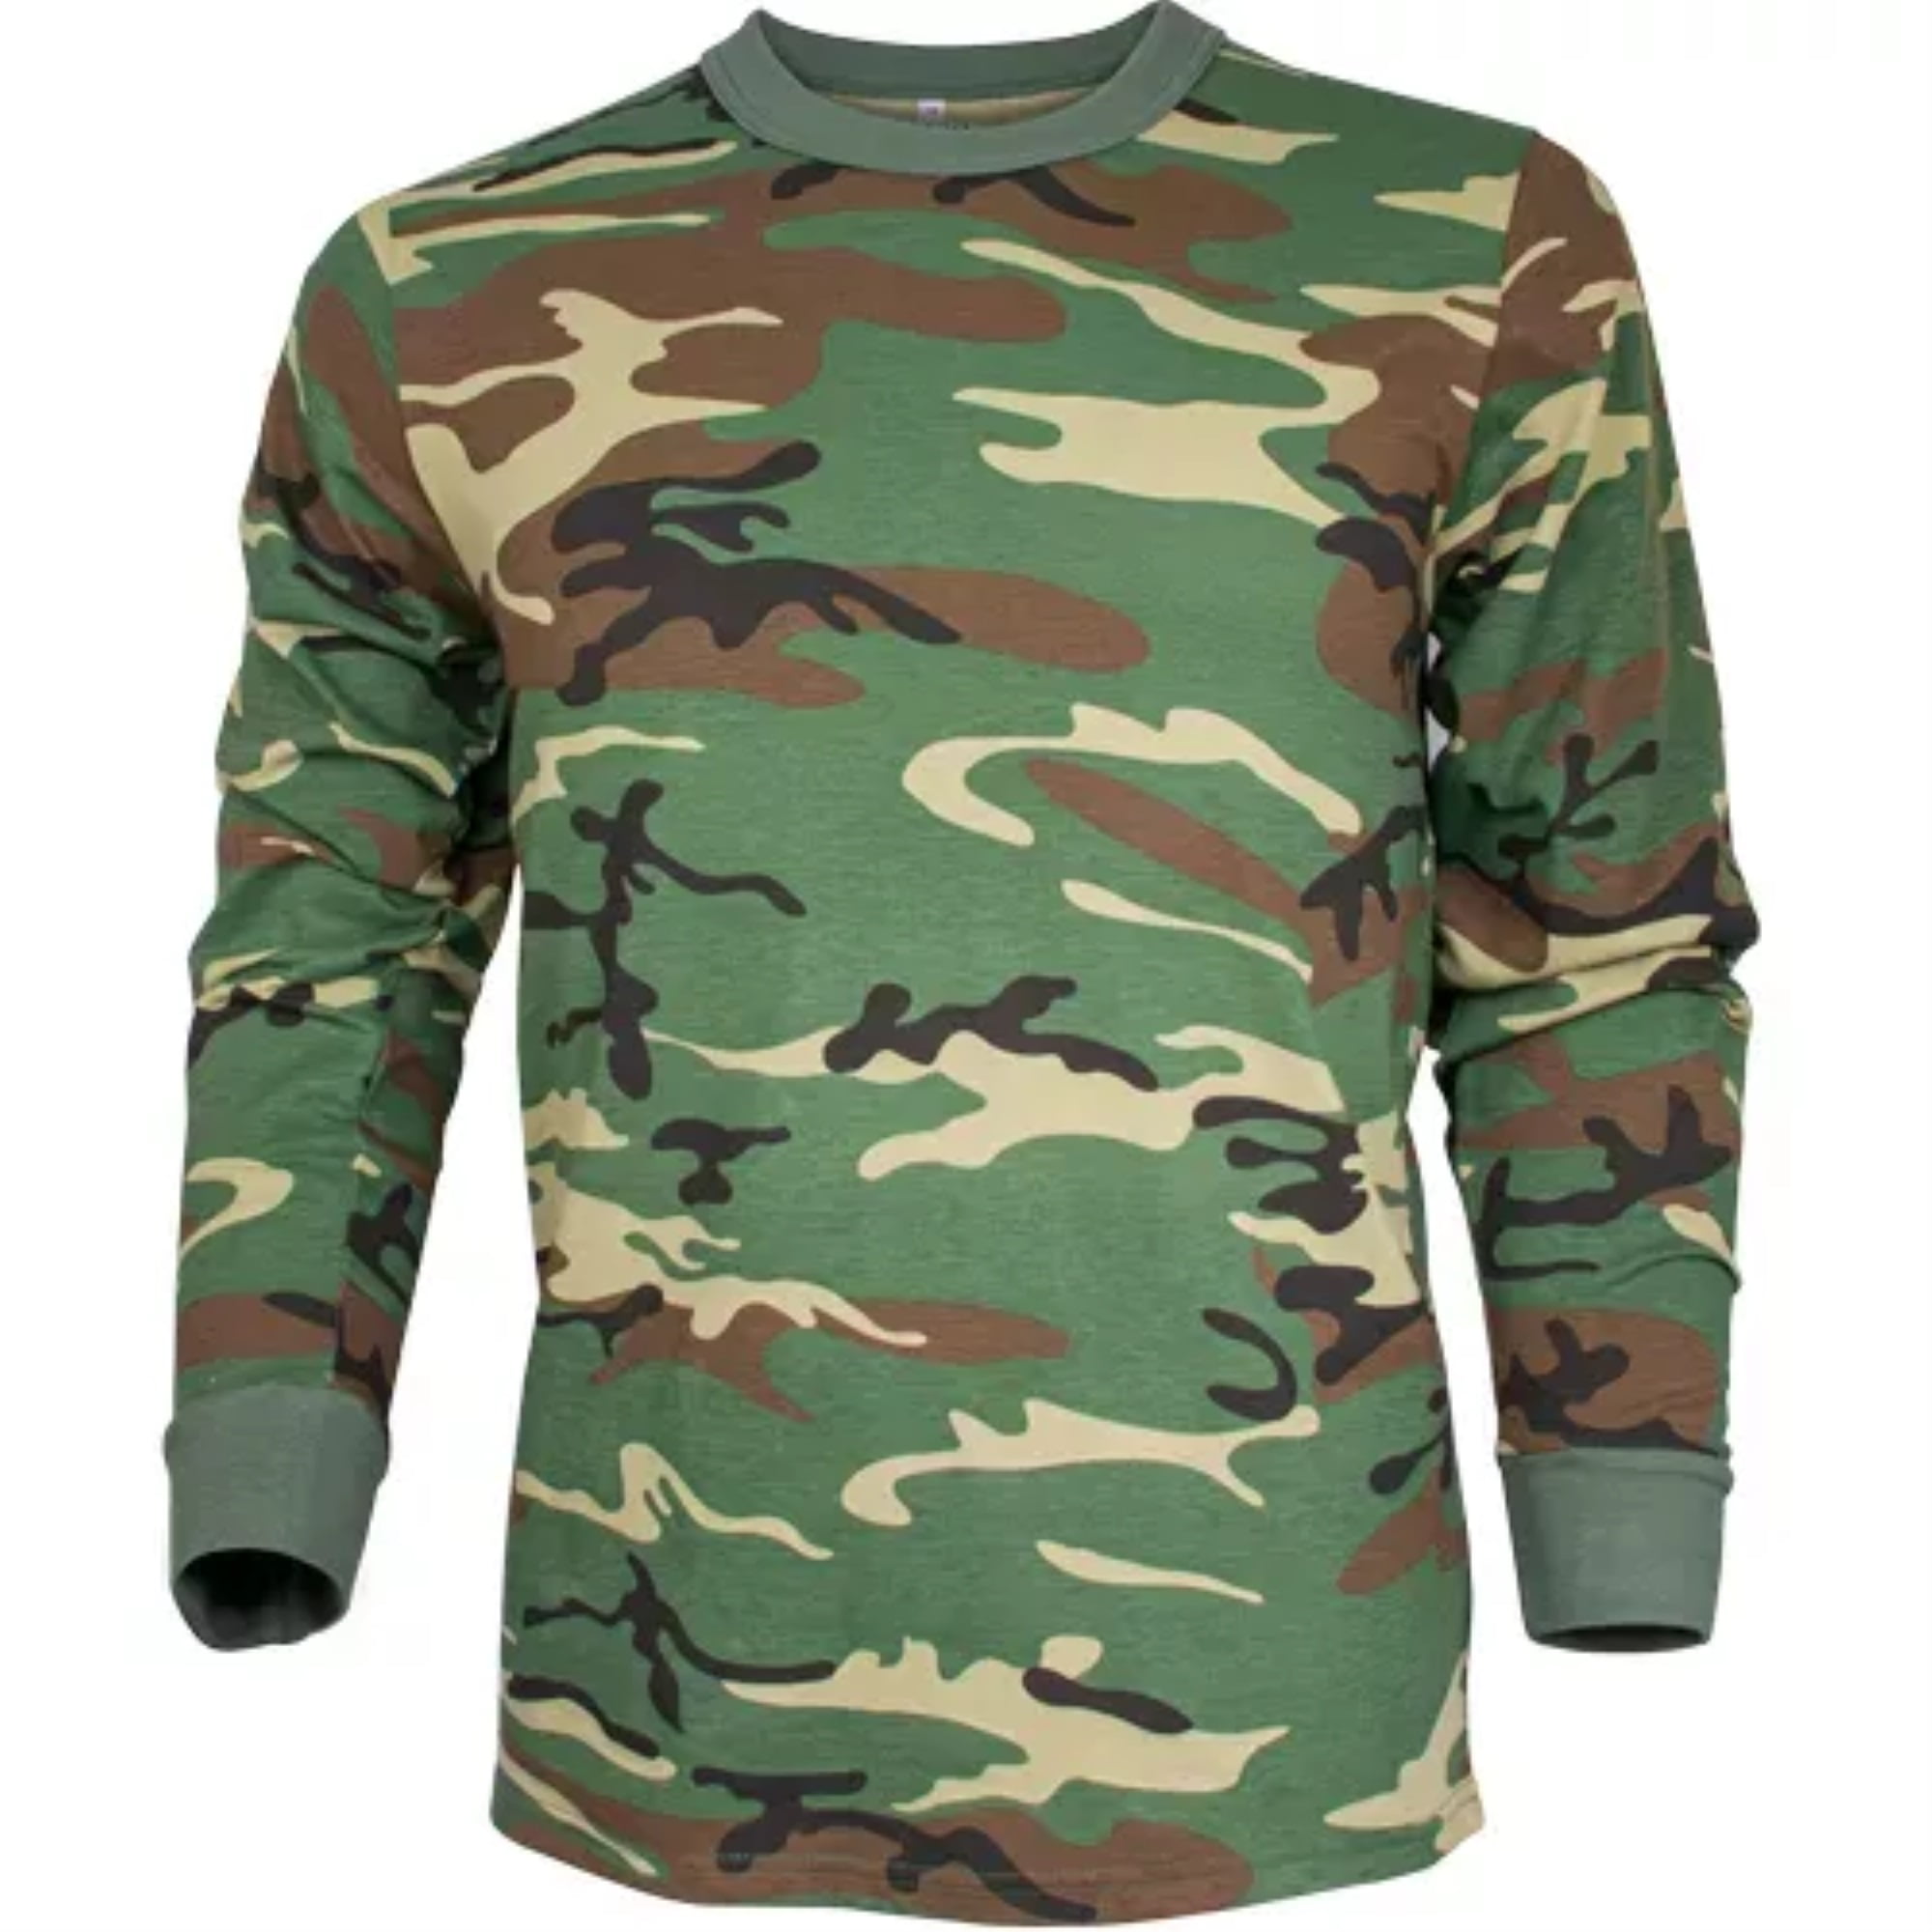 Mens Woodland Camo Tactical T-Shirt Military Army Green Camouflage Short Sleeve 